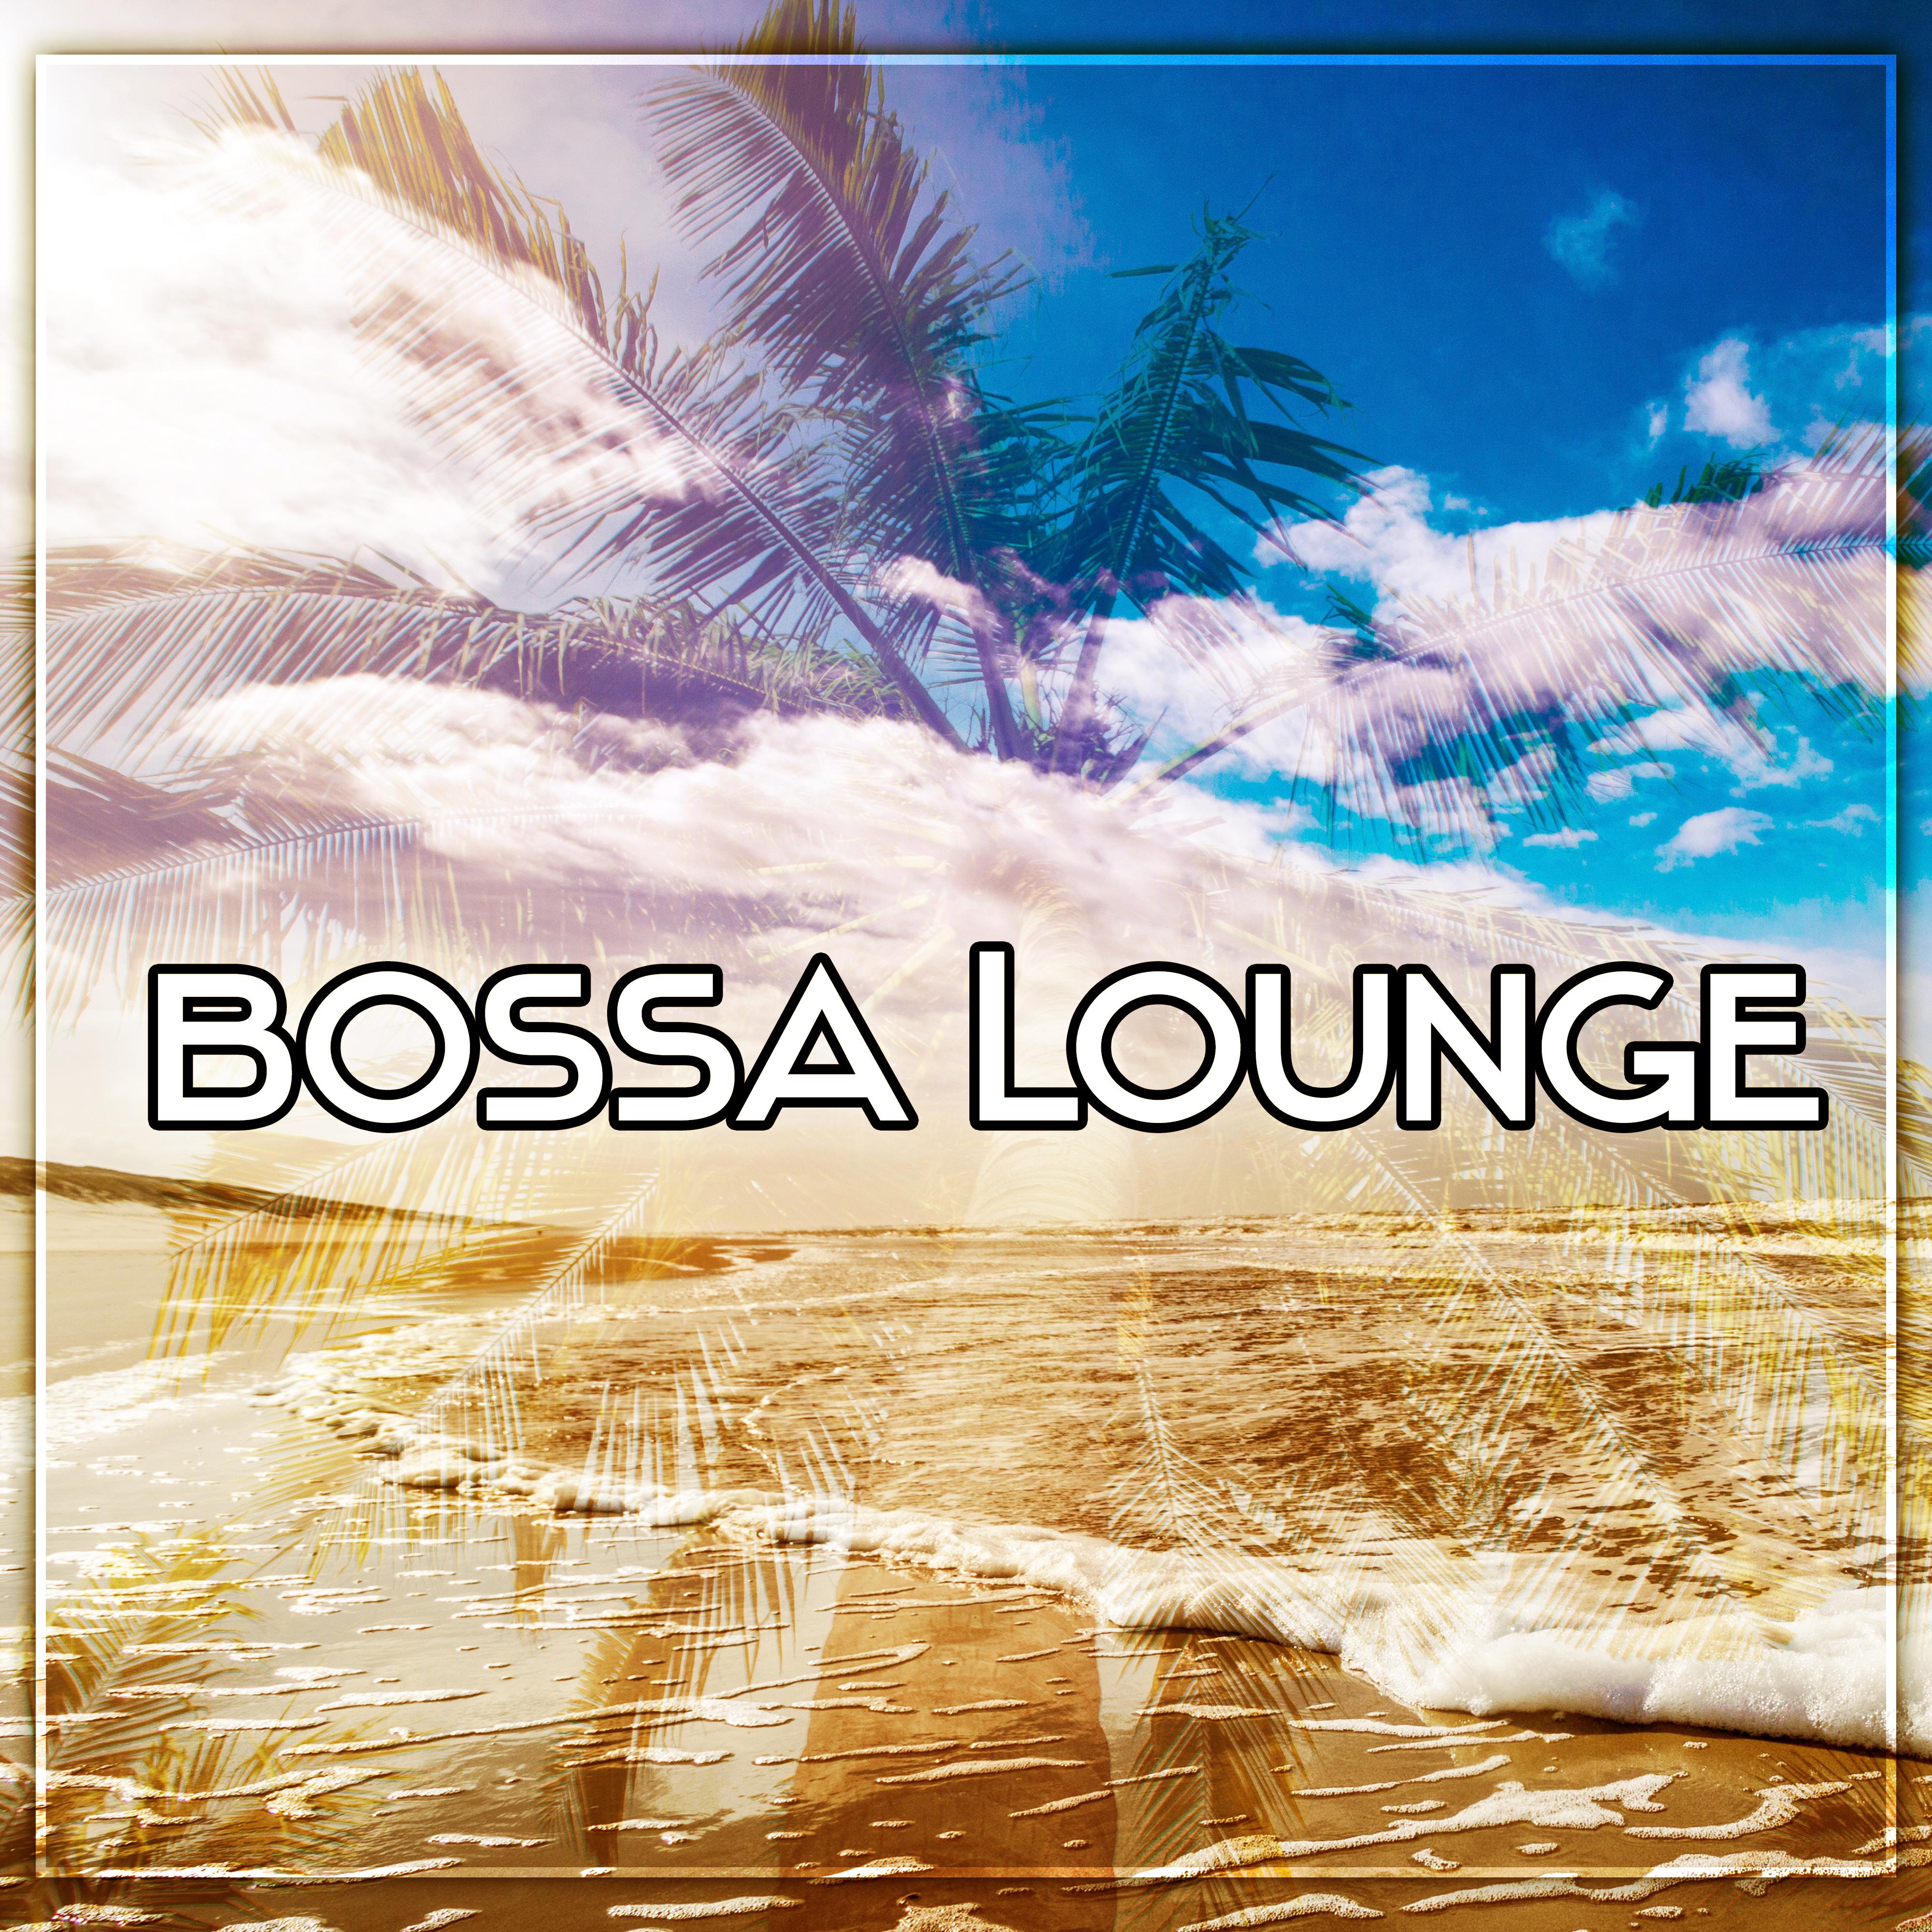 Bossa Lounge- The Best of Lounge Music, The Sounds of the Landscape